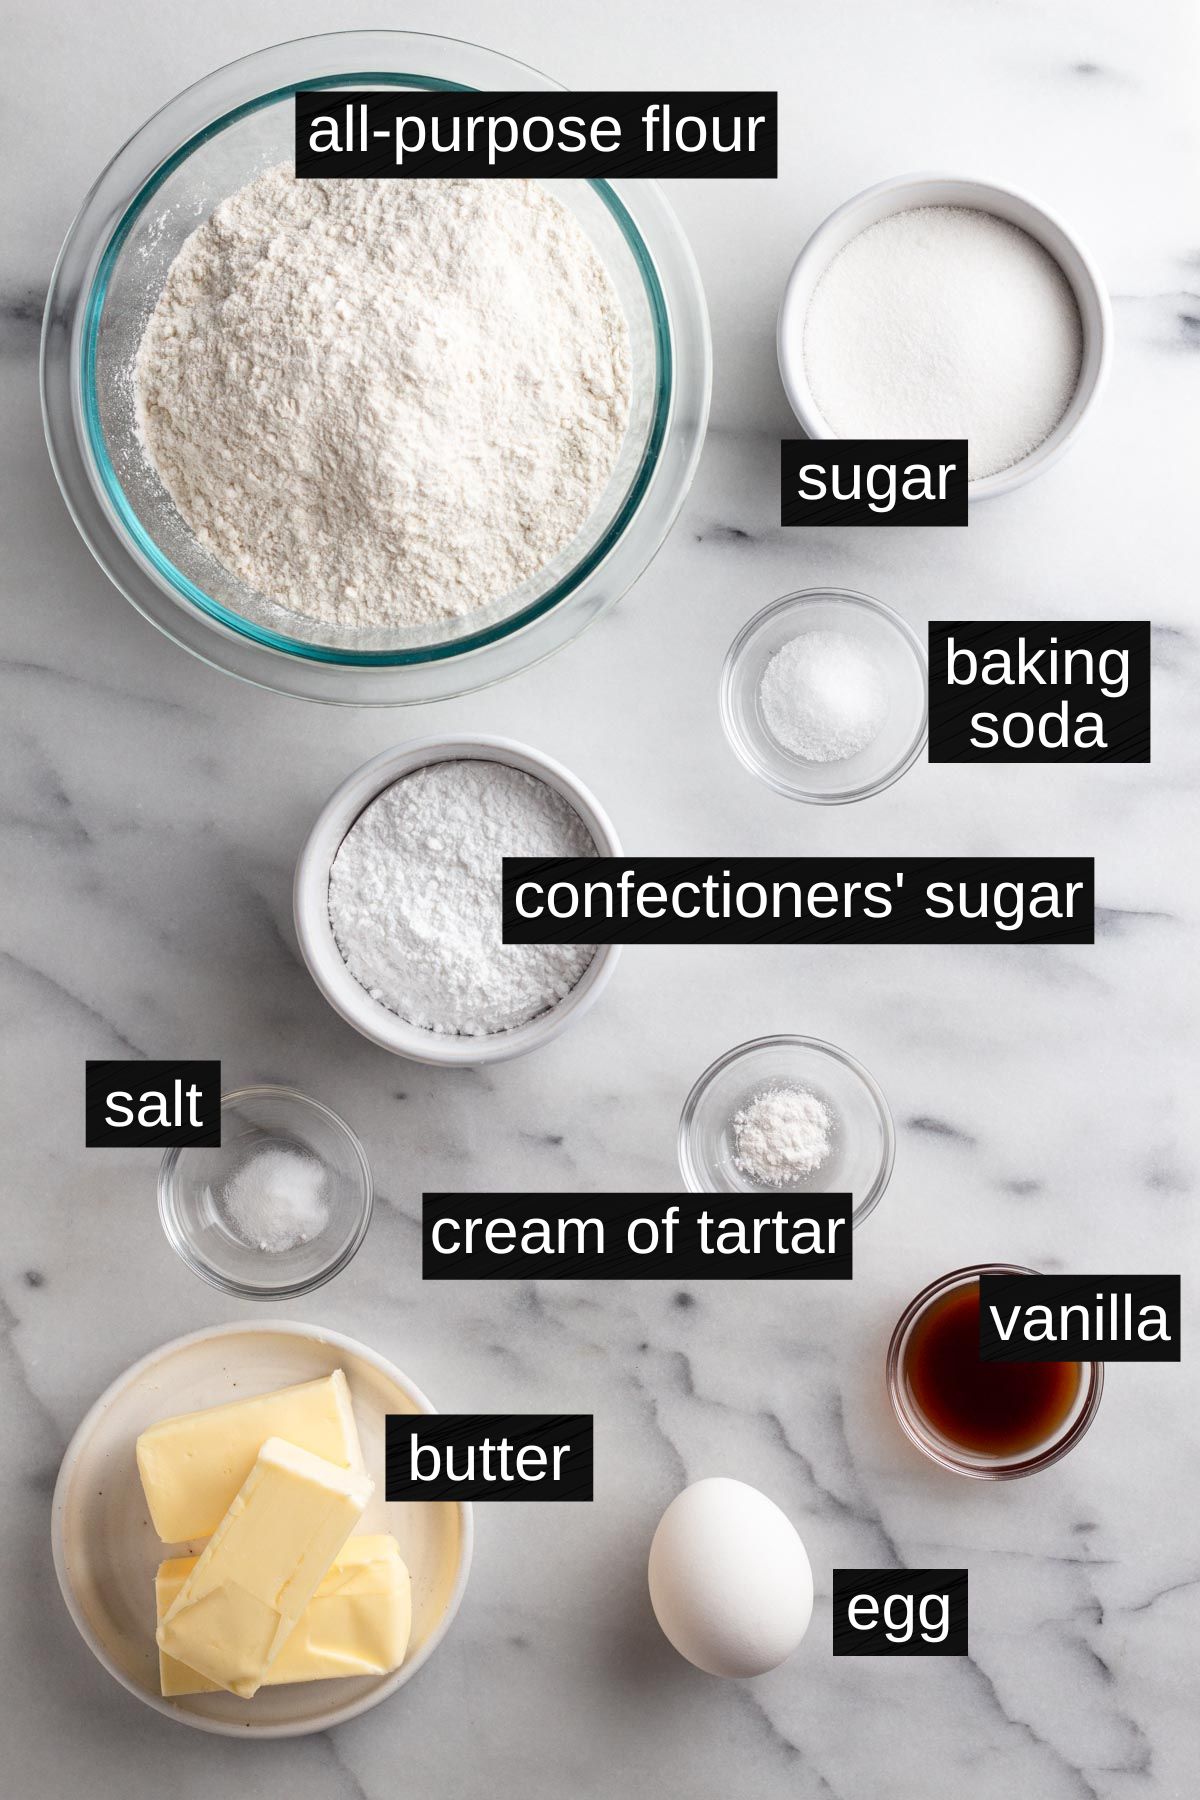 Recipe ingredients with labels on a marble surface.